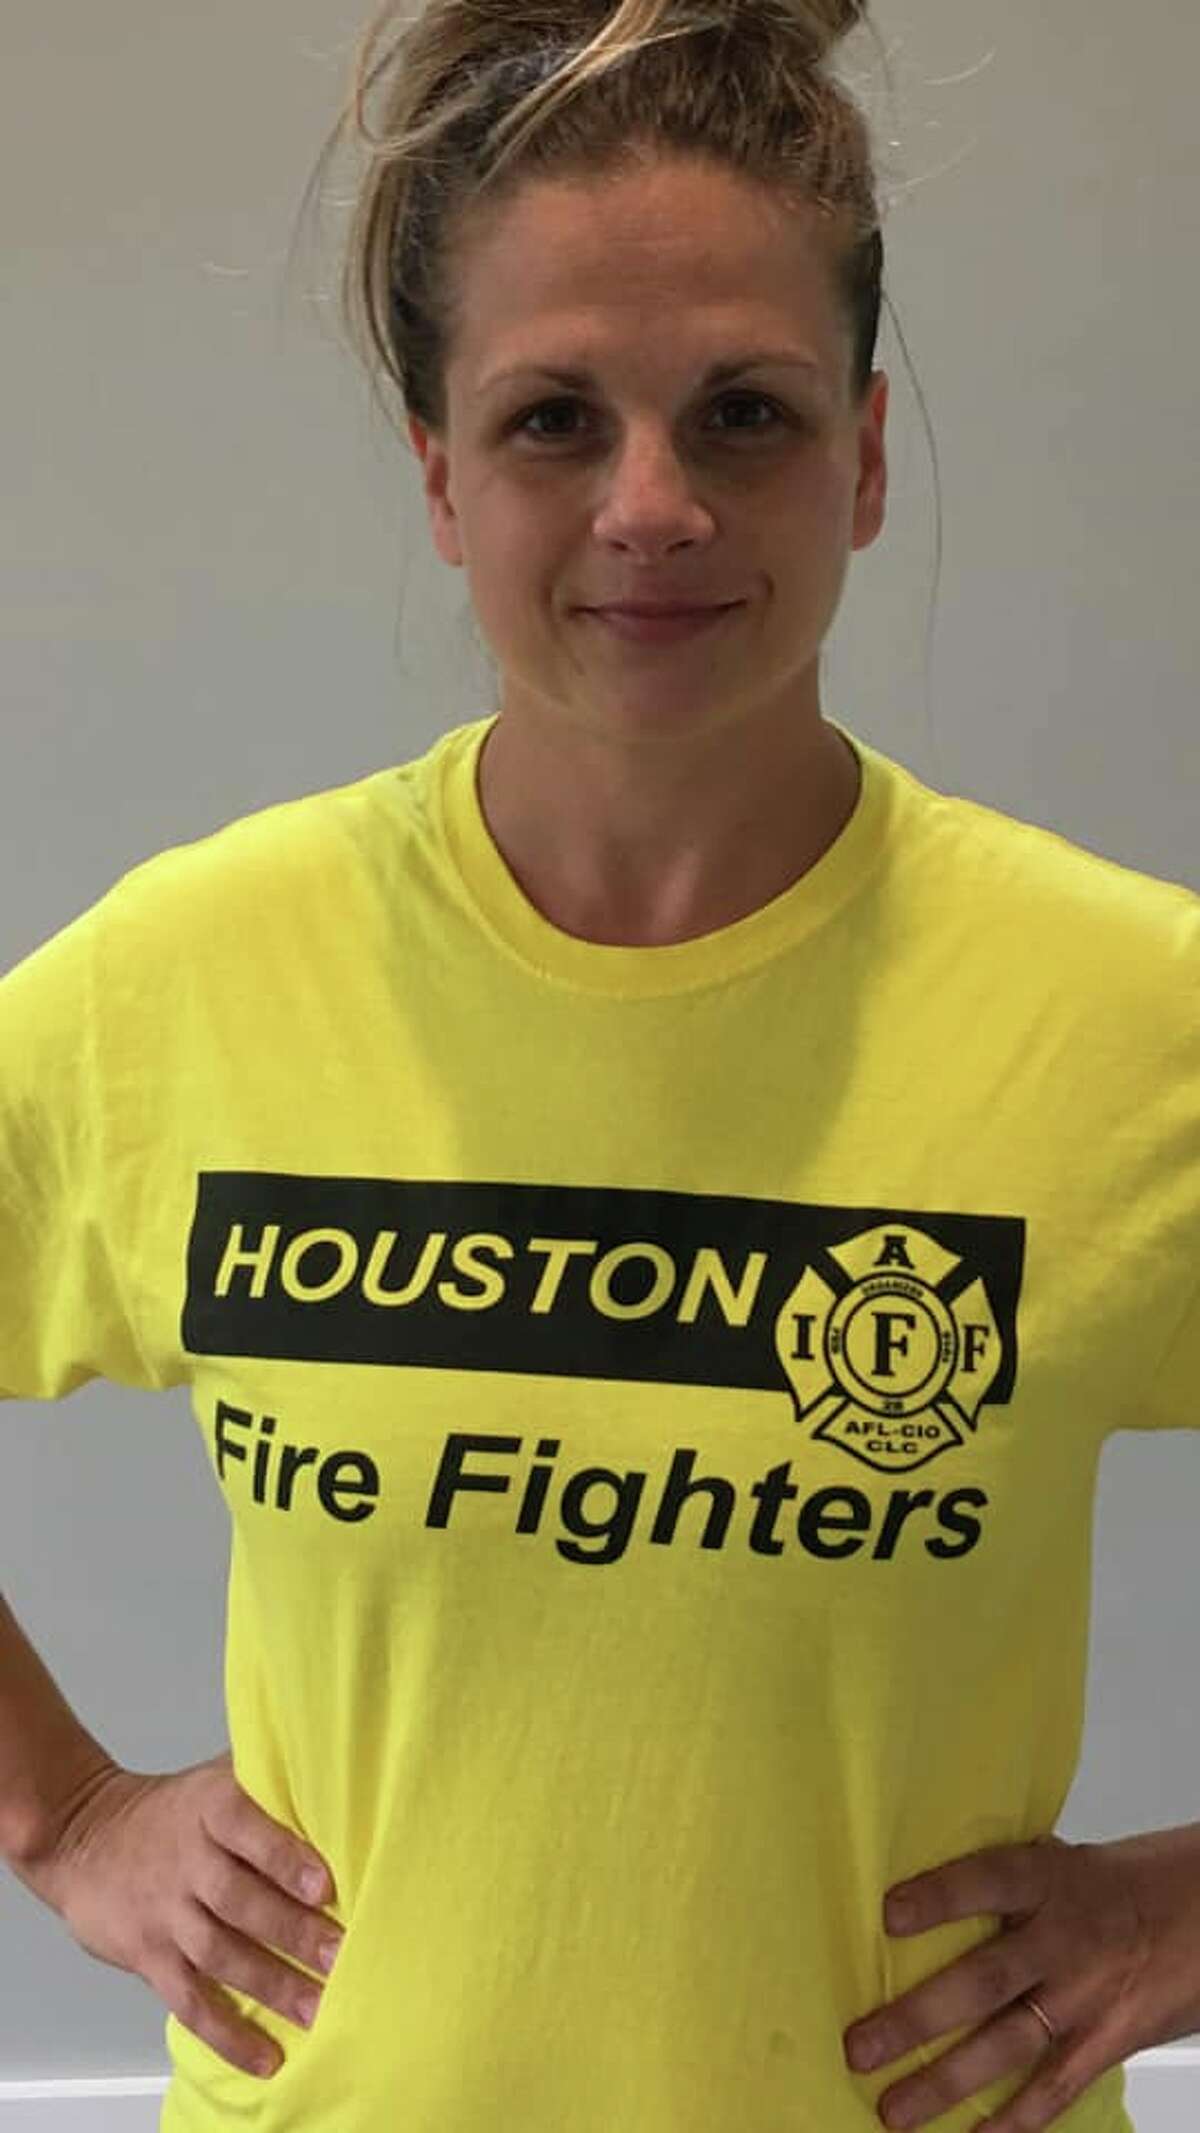 Jillian Ostrewich, the wife of a Houston firefighter, said she was asked to turn her Houston Fire Fighters shirt inside out at a polling station earlier this week, even thought the shirt didn't appear to break state election law. The fire union said around 25 other firefighters had been asked to cover their generic fire department shirts. >>>